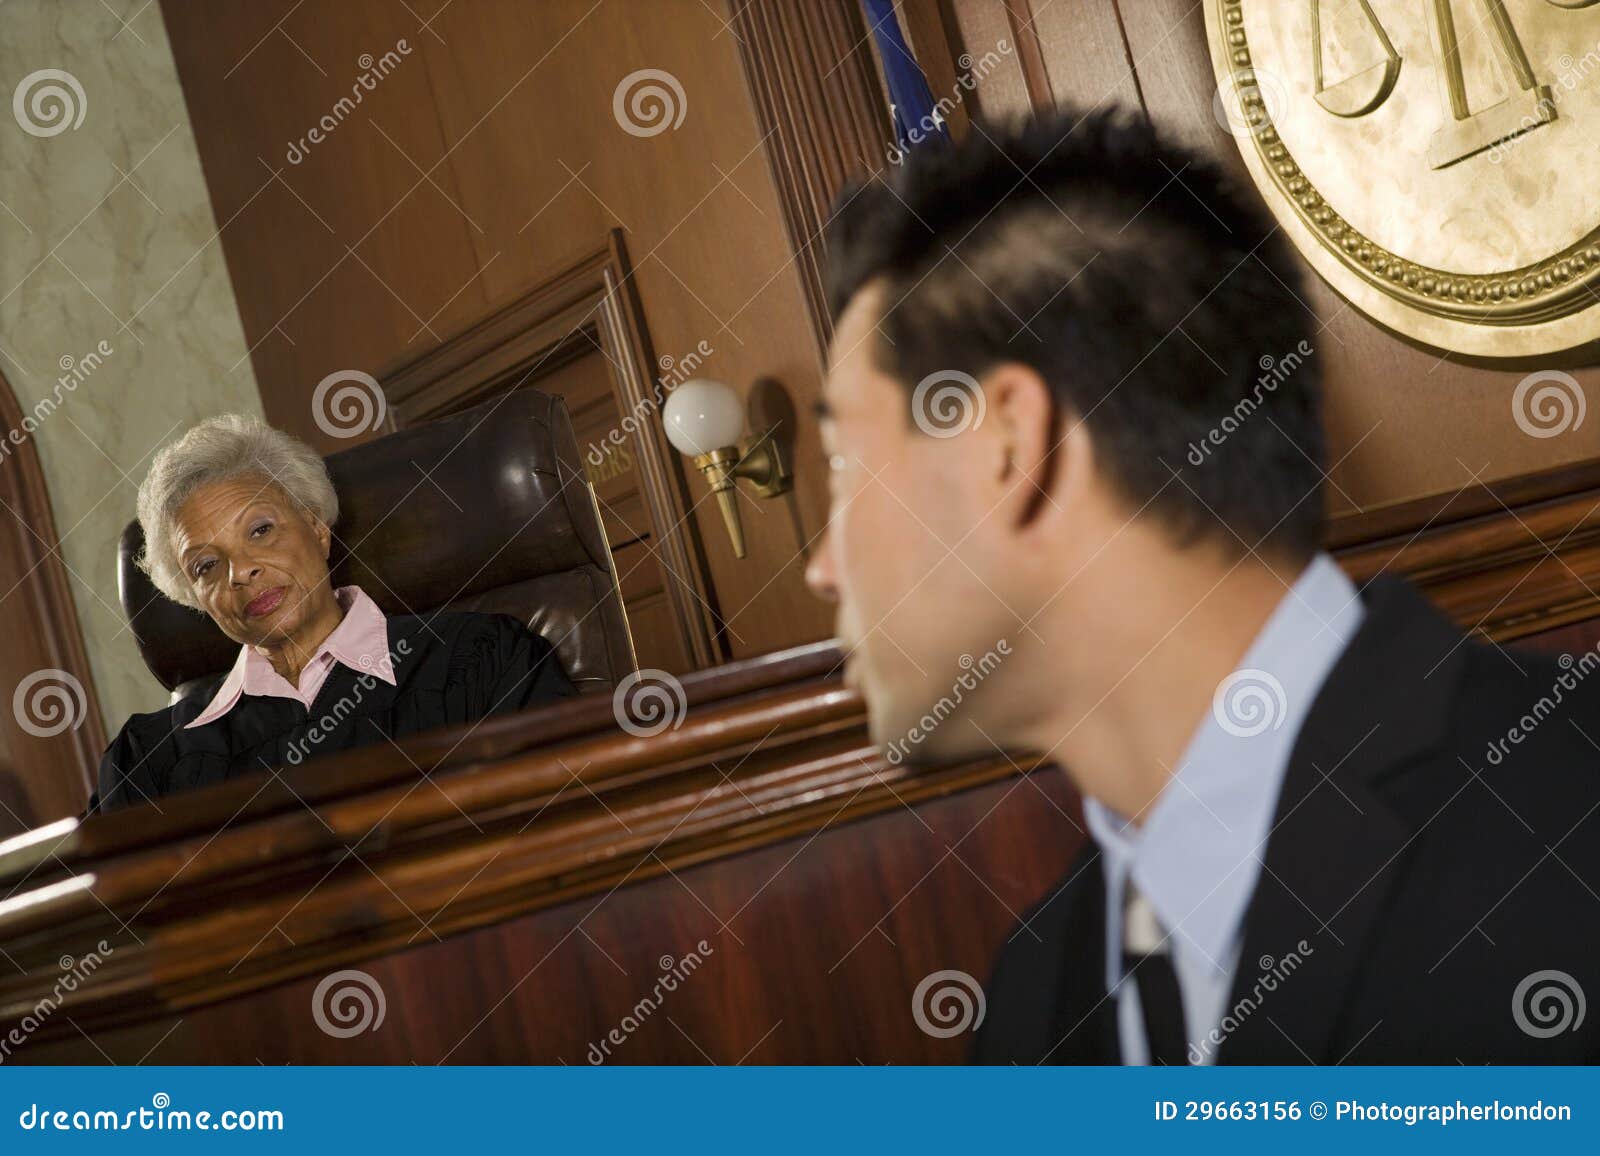 judge and witness looking at each other